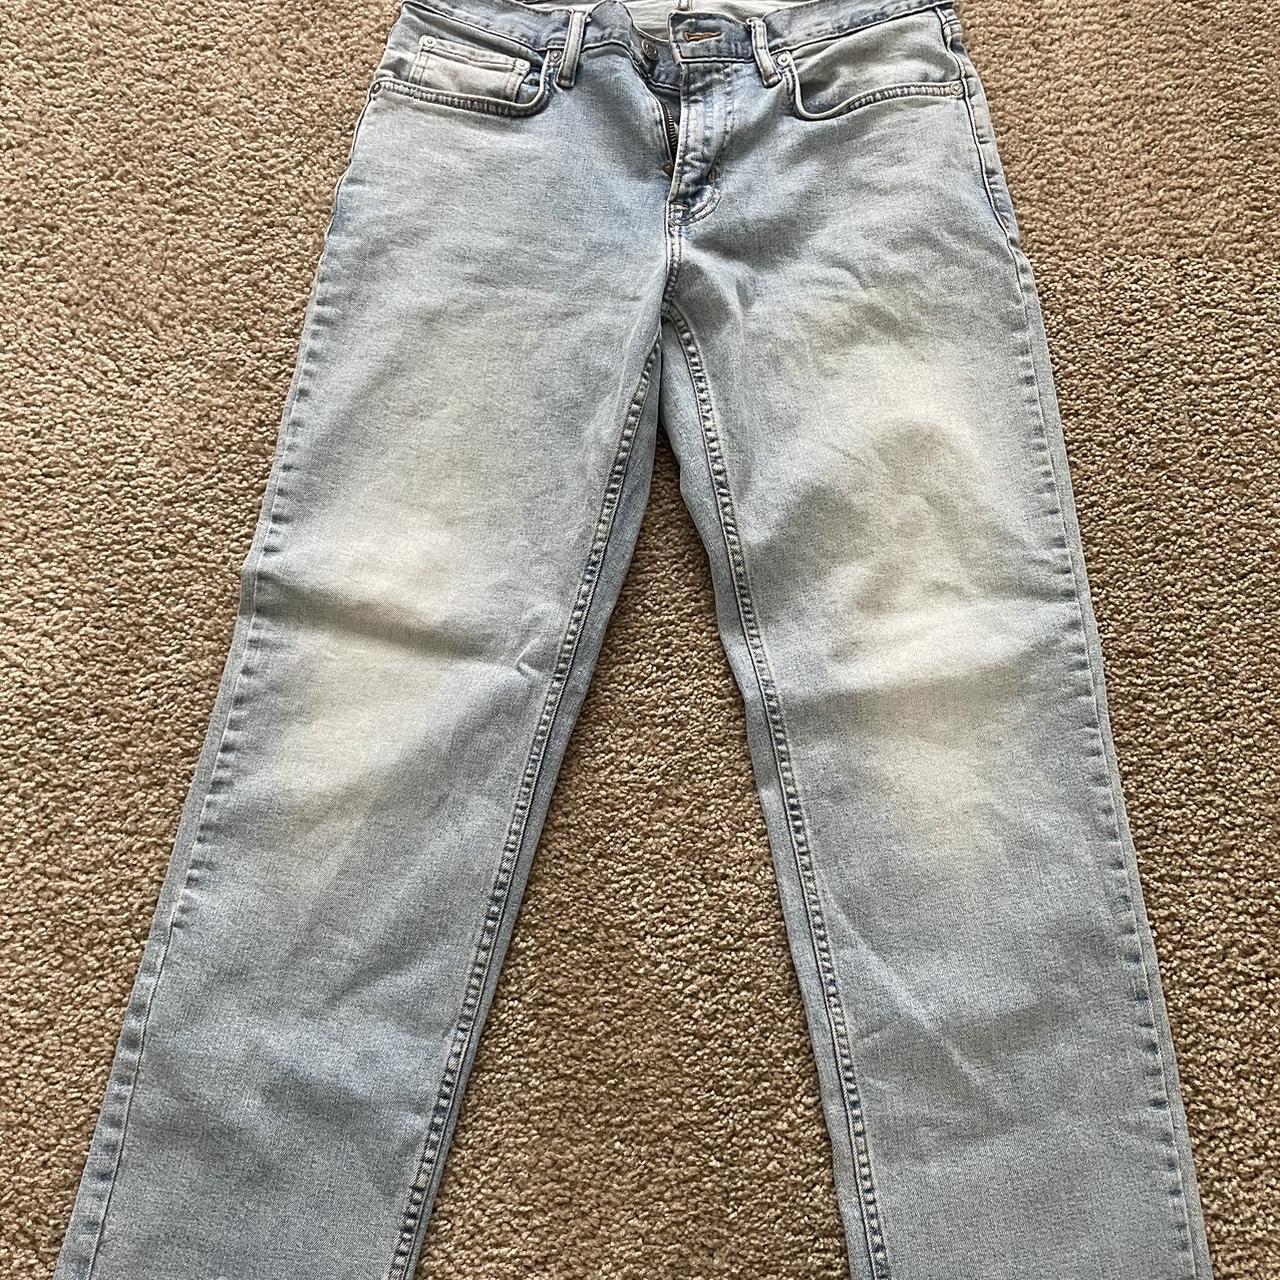 Old Navy Unisex Loose Jeans